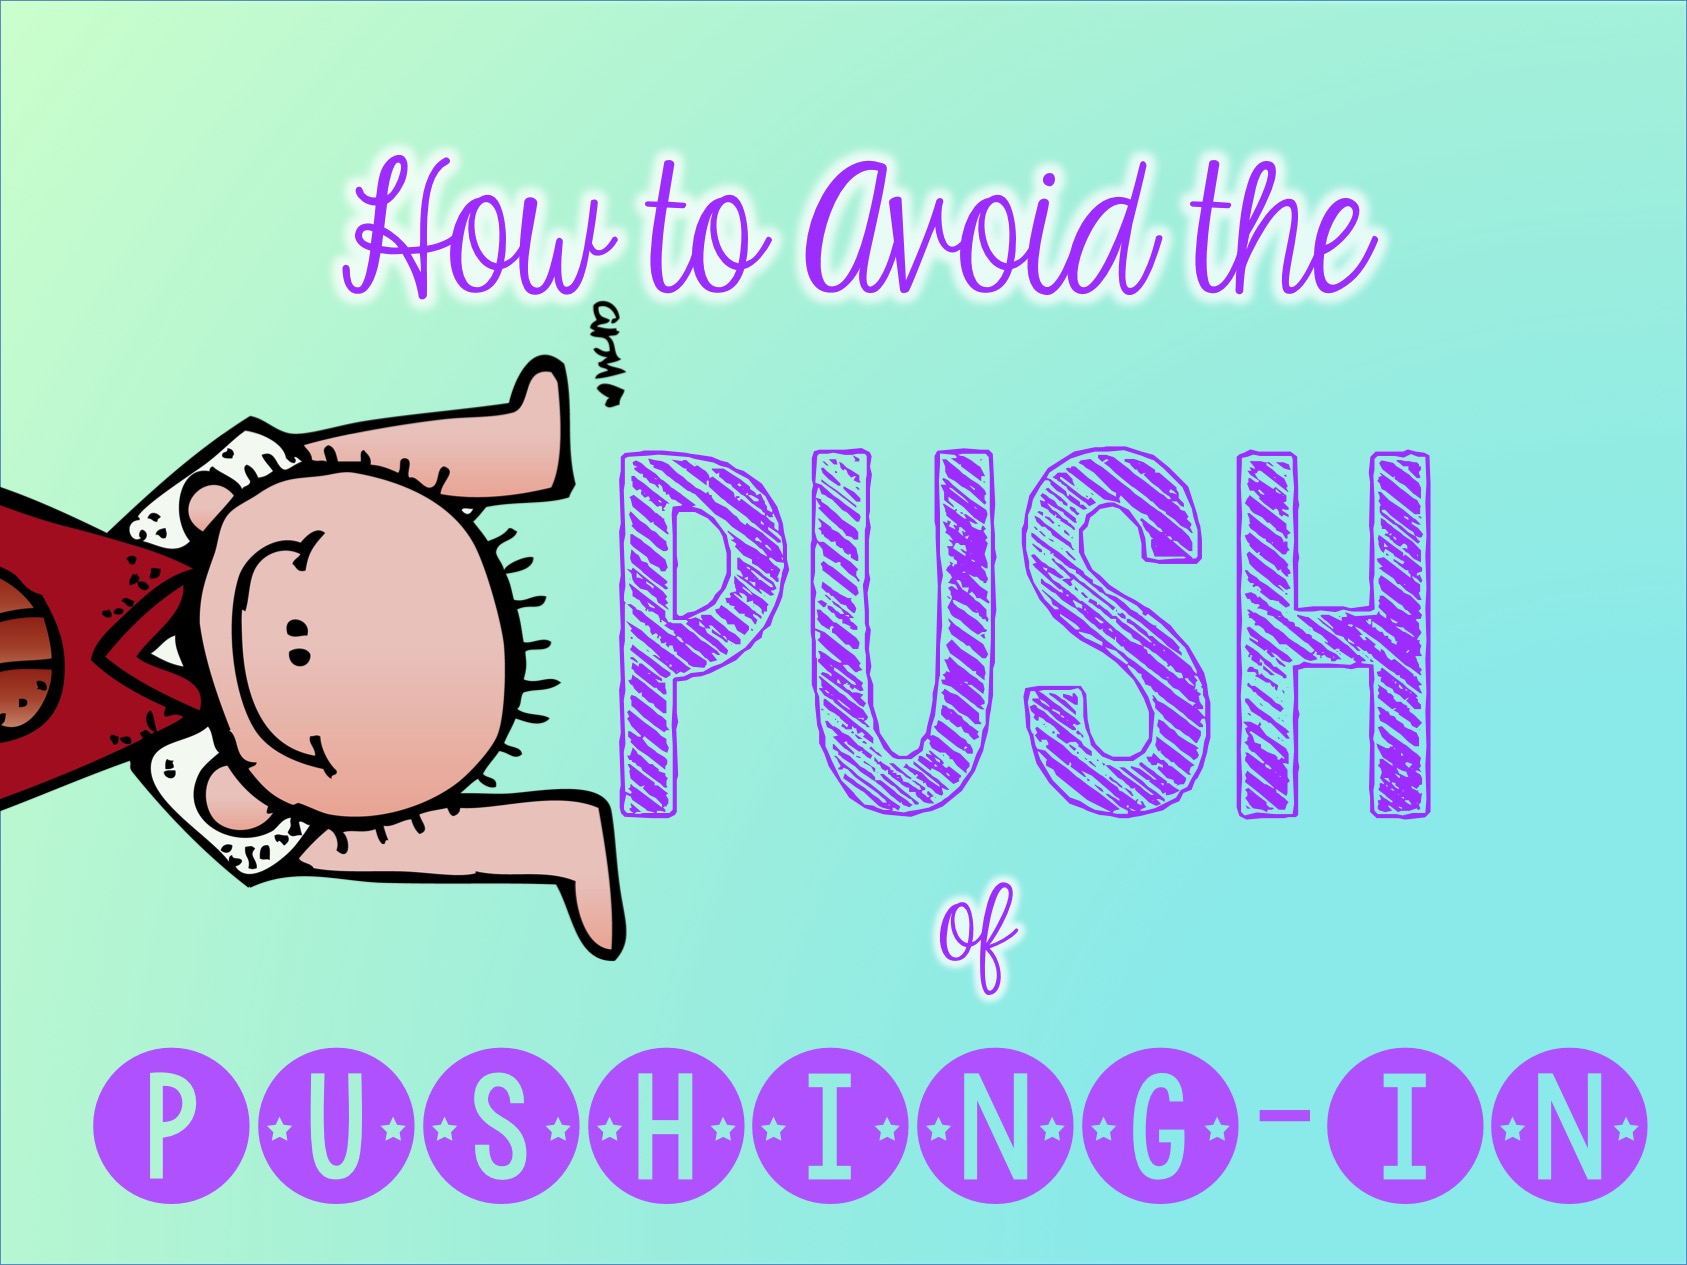 How To Avoid The Push of Push-In Speech Therapy